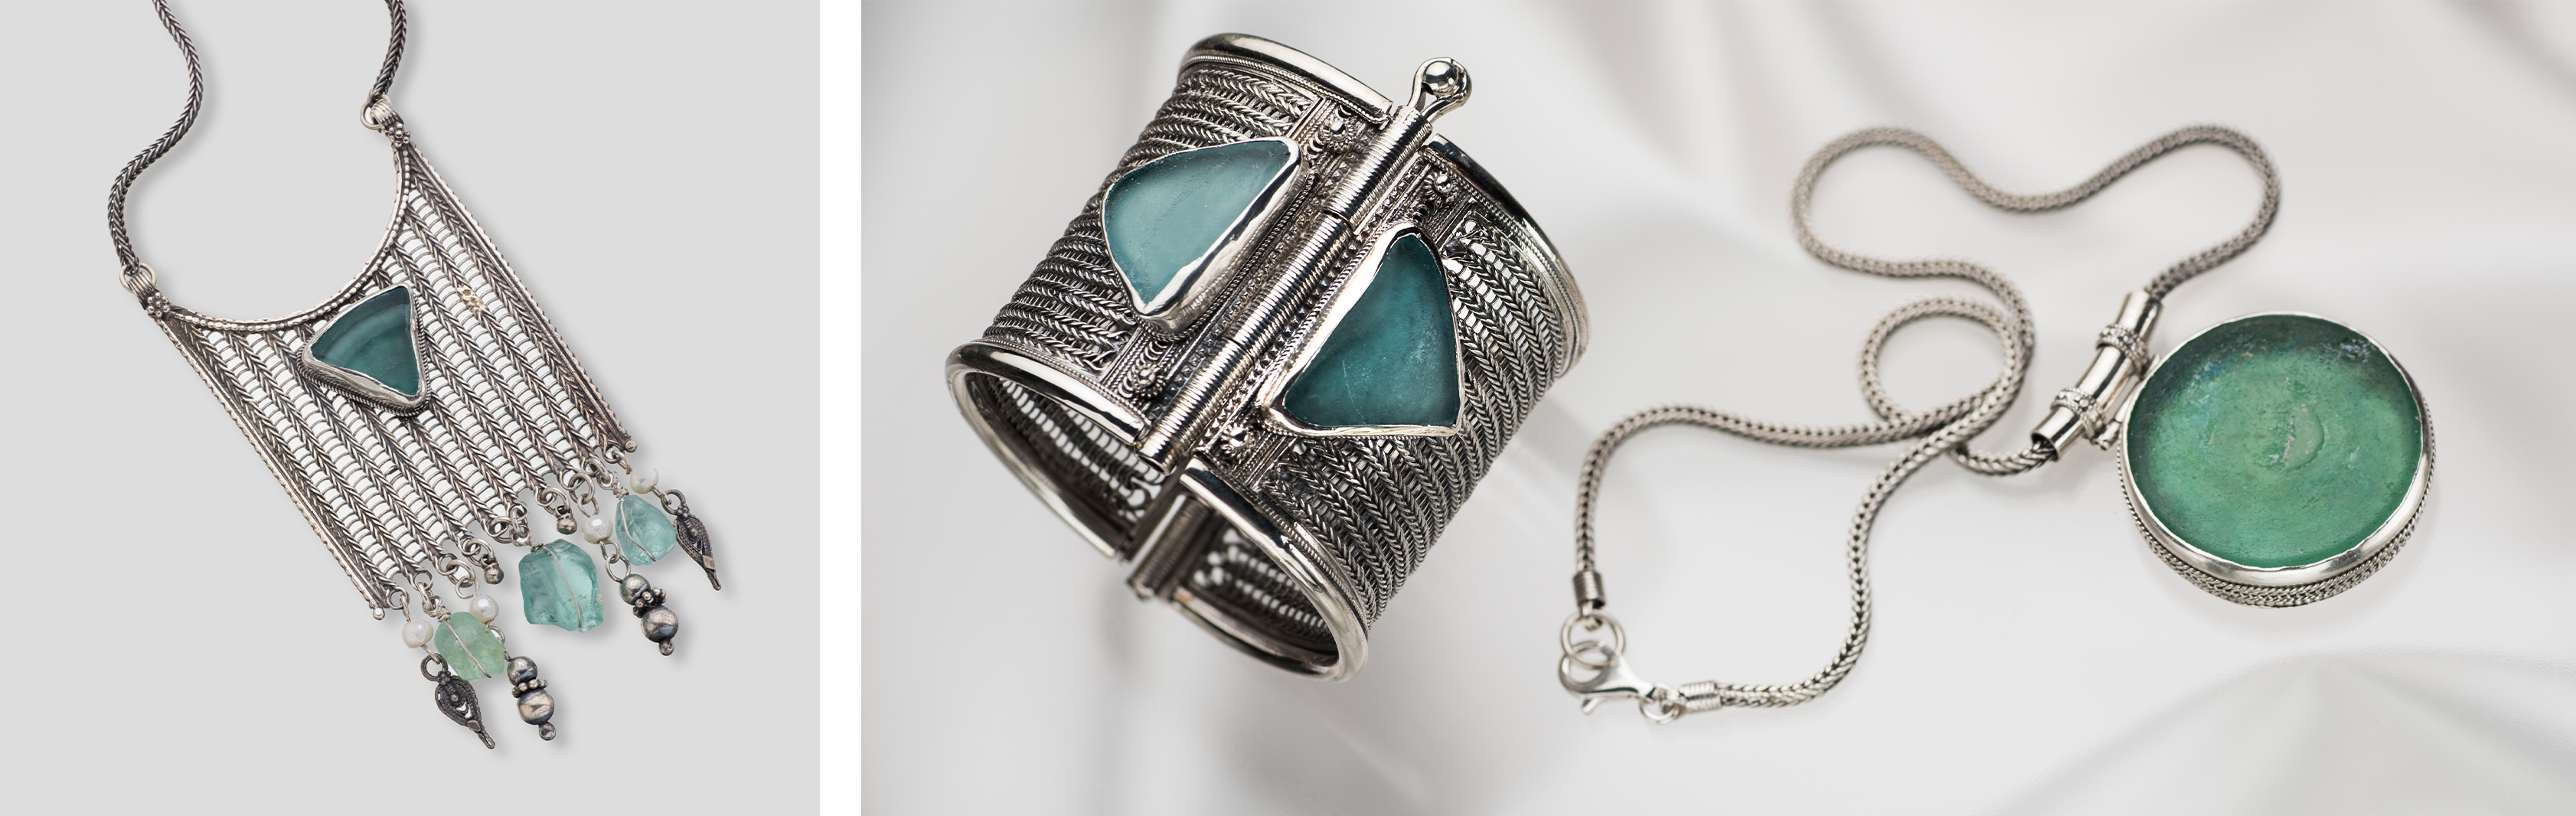 Roman Glass: Filigree Silver Collection | 925 Sterling Silver Jewelry with Roman Glass